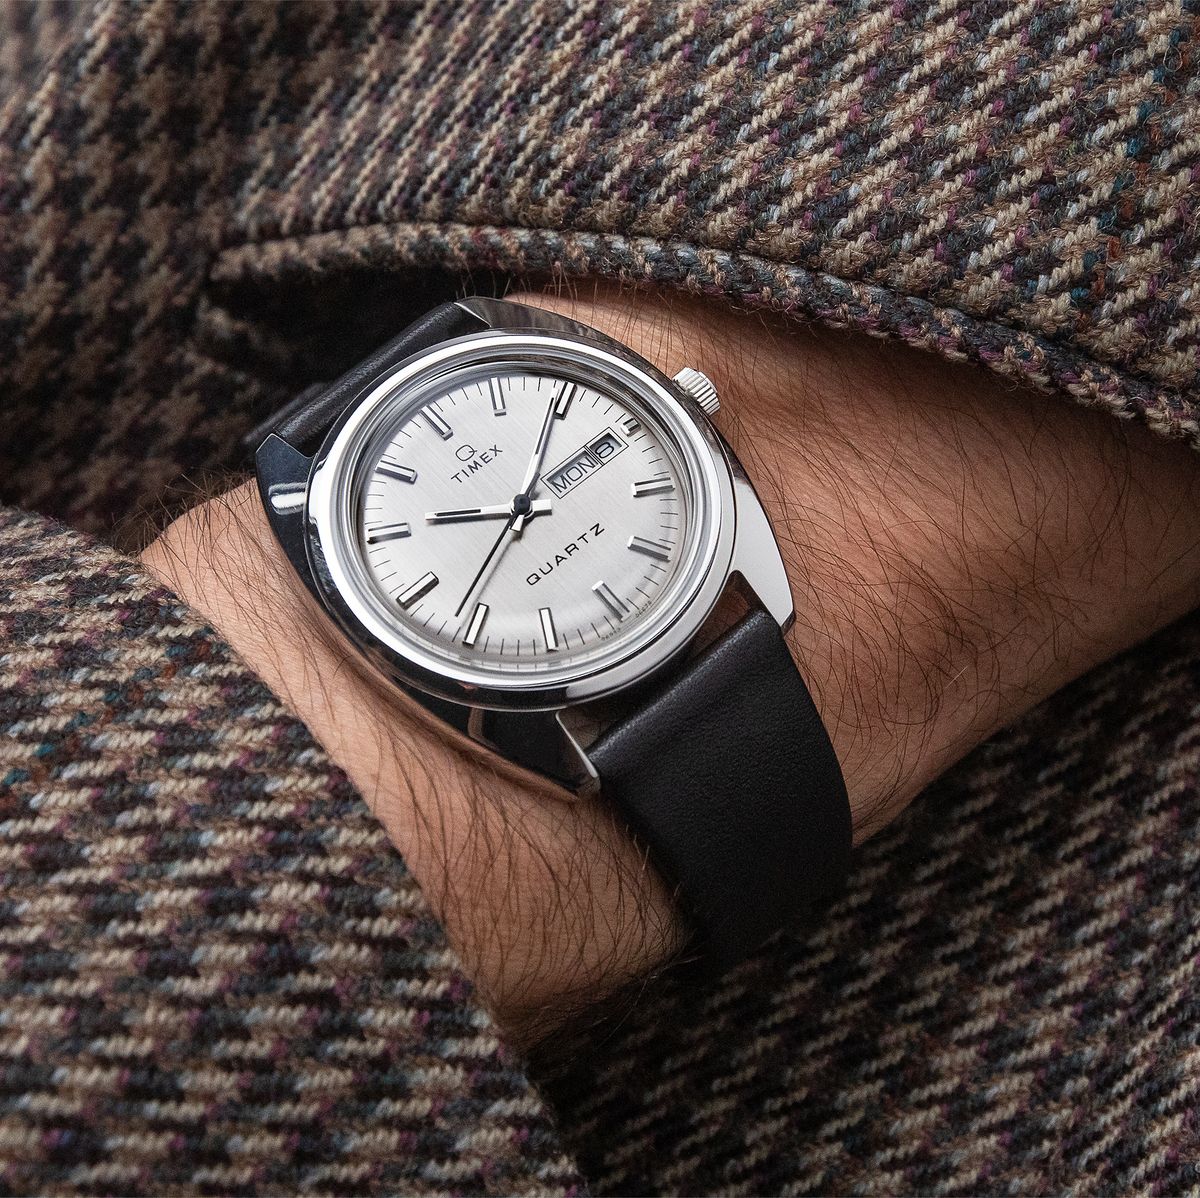 Timex's Retro Q Might Be the Only Dress Watch You Need